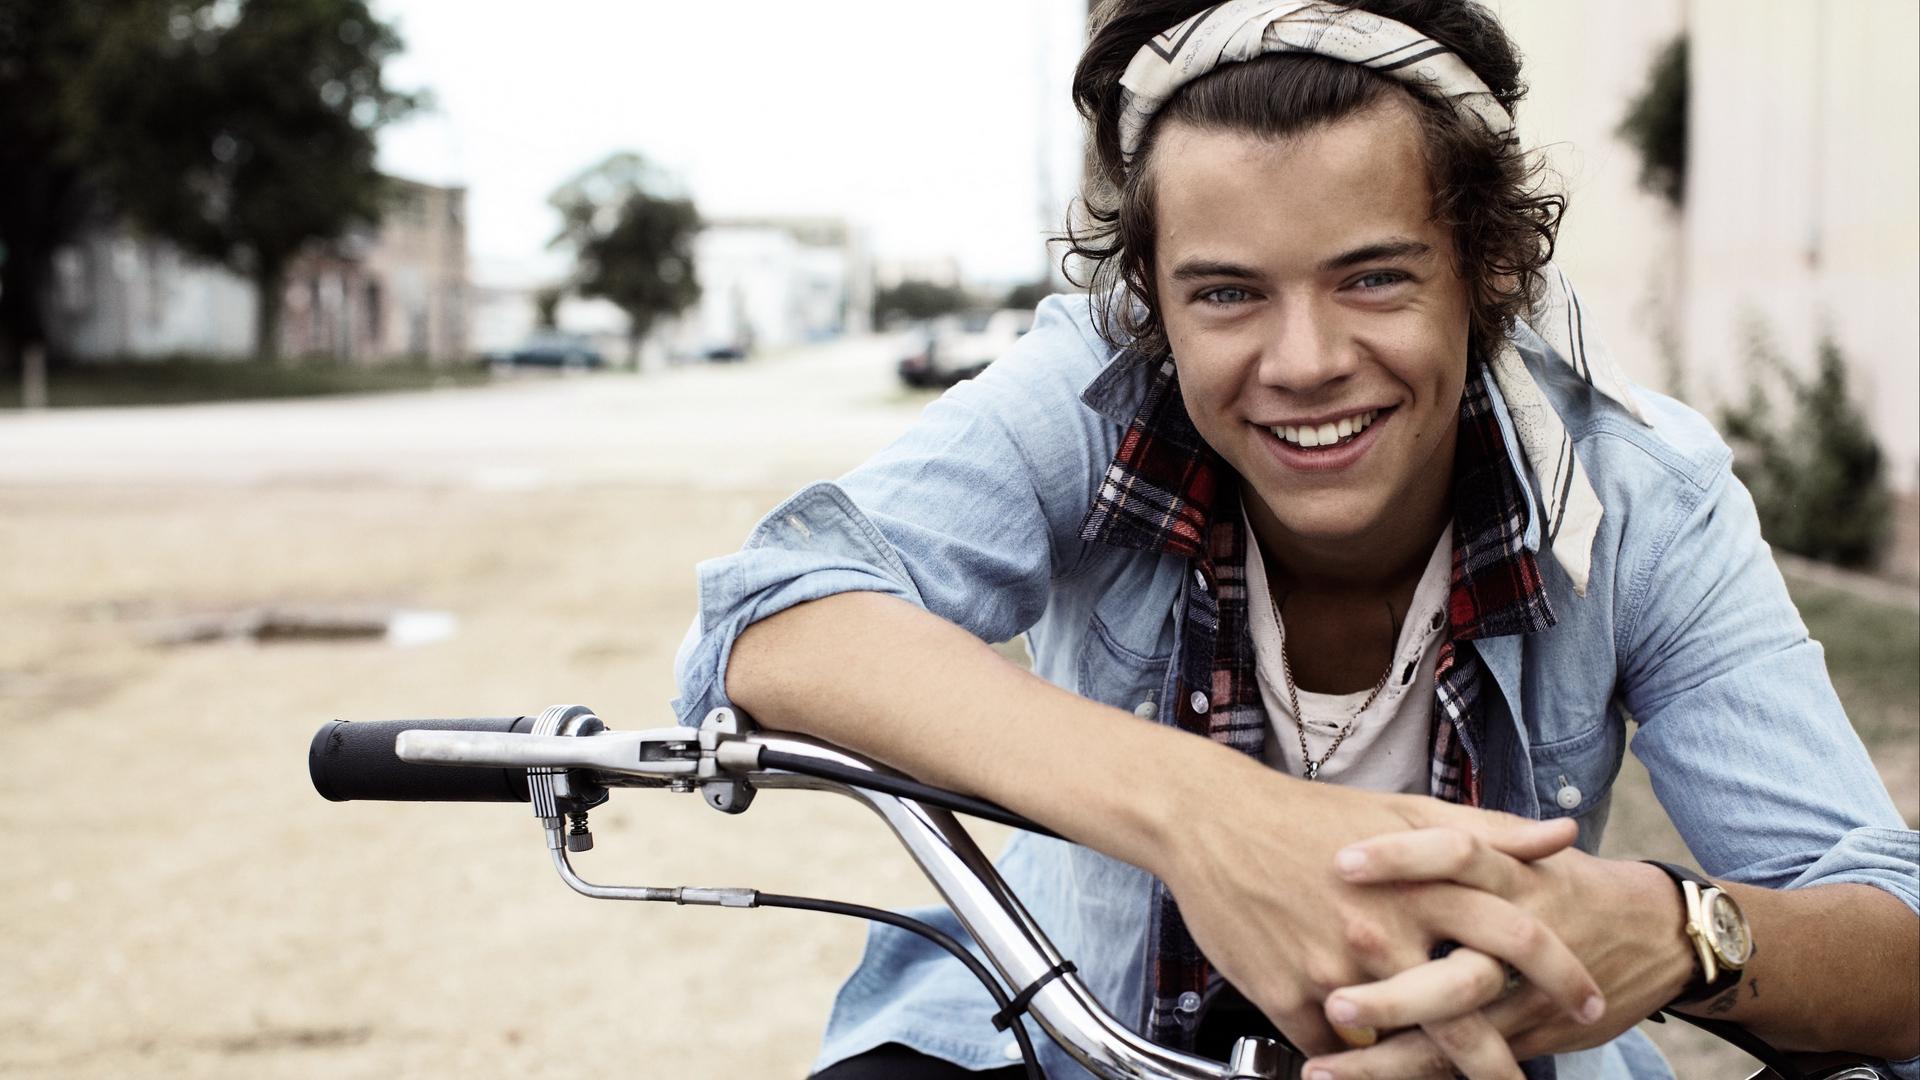 Download wallpapers 1920x1080 one direction, 1d, harry styles